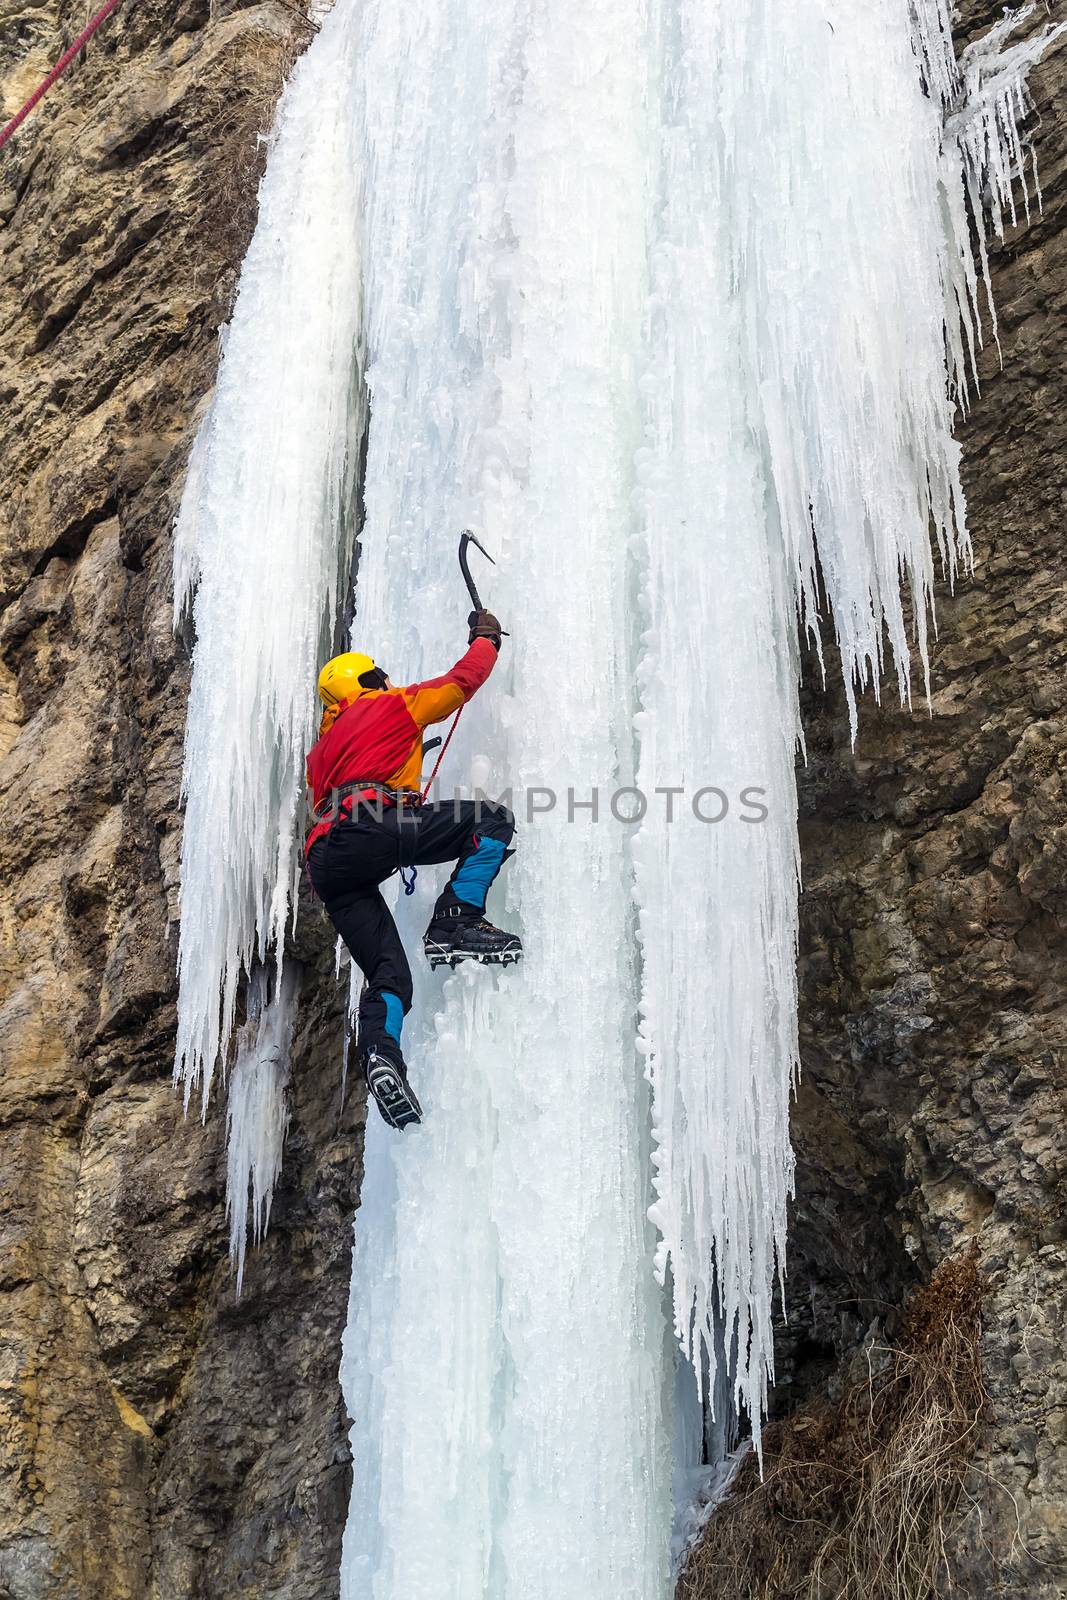 Extreme ice climbing. Man climbing the frozen waterfall using ice axes and crampons.